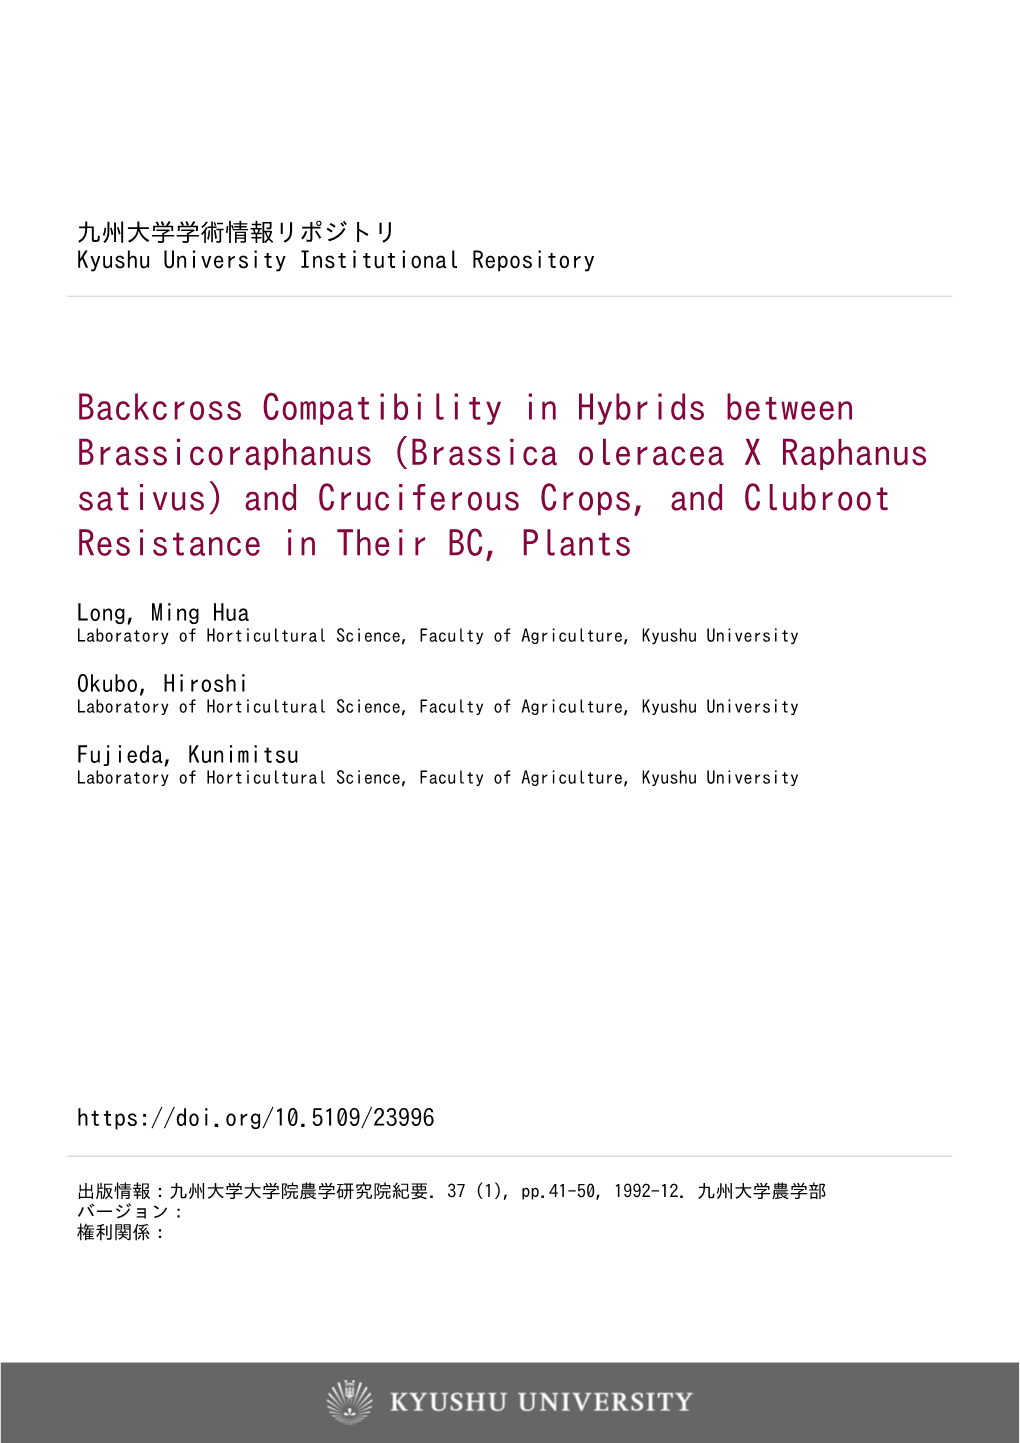 Backcross Compatibility in Hybrids Between Brassicoraphanus (Brassica Oleracea X Raphanus Sativus) and Cruciferous Crops, and Clubroot Resistance in Their BC, Plants